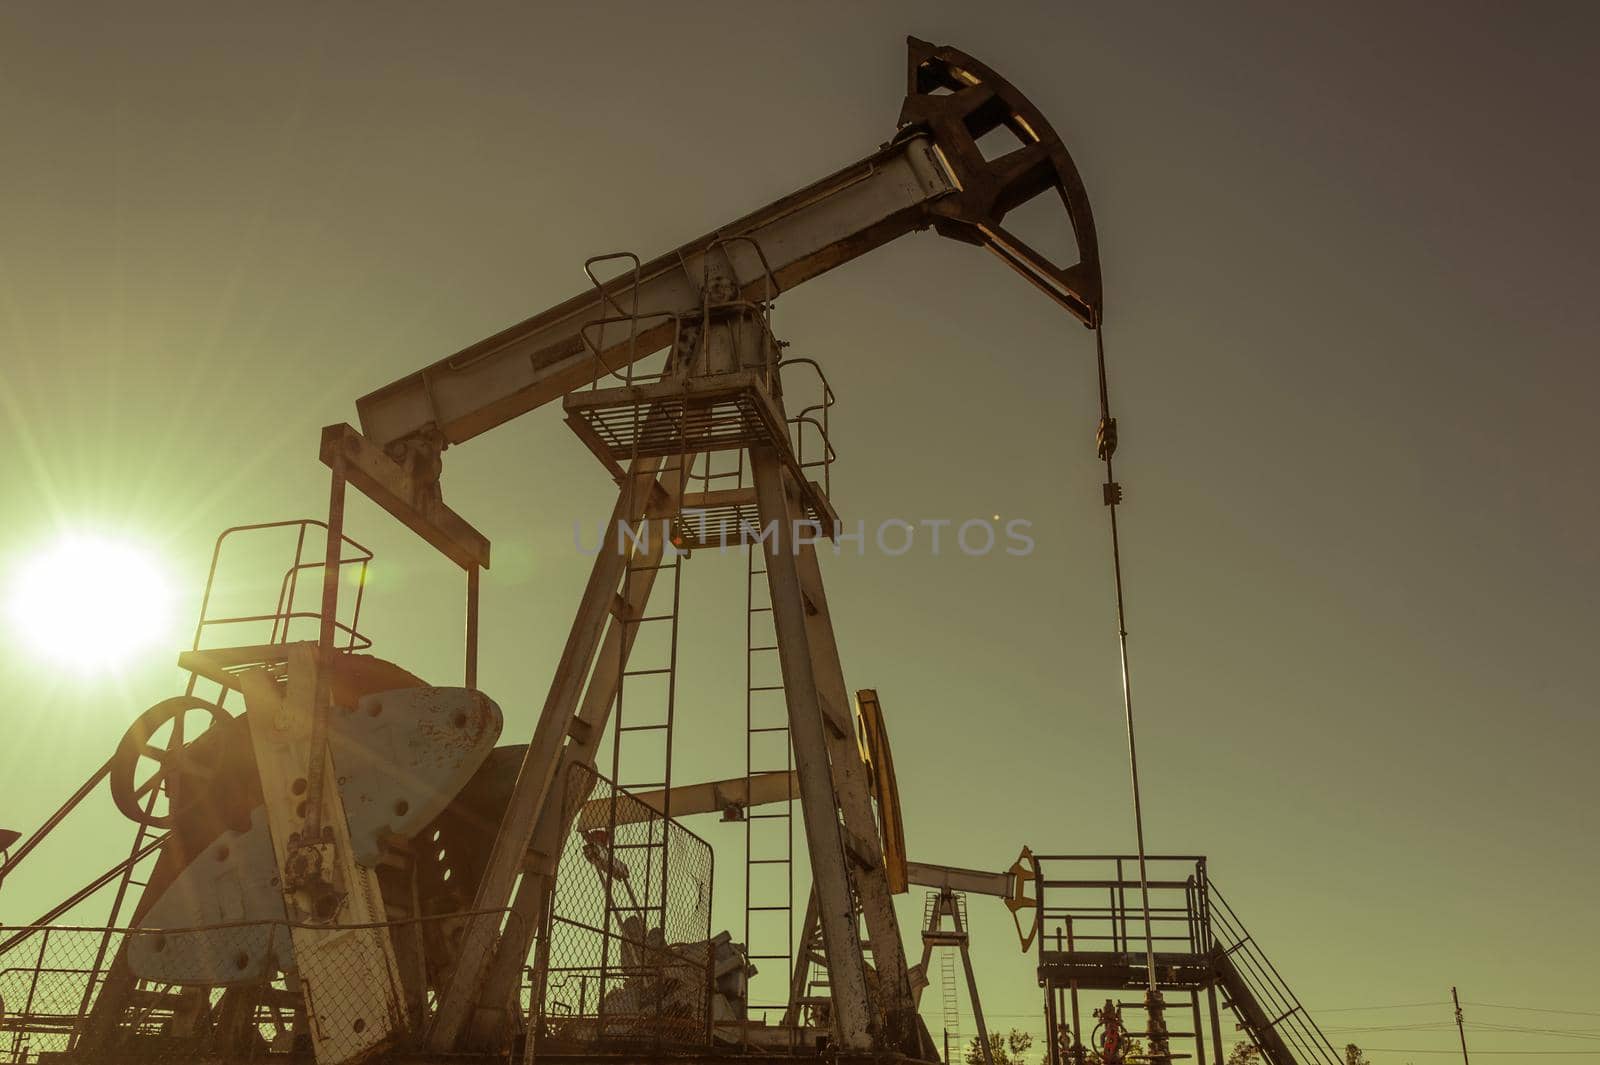 Oil pumpjack, industrial equipment. Rocking machines for power genertion. Extraction of oil. Petroleum concept. by bashta